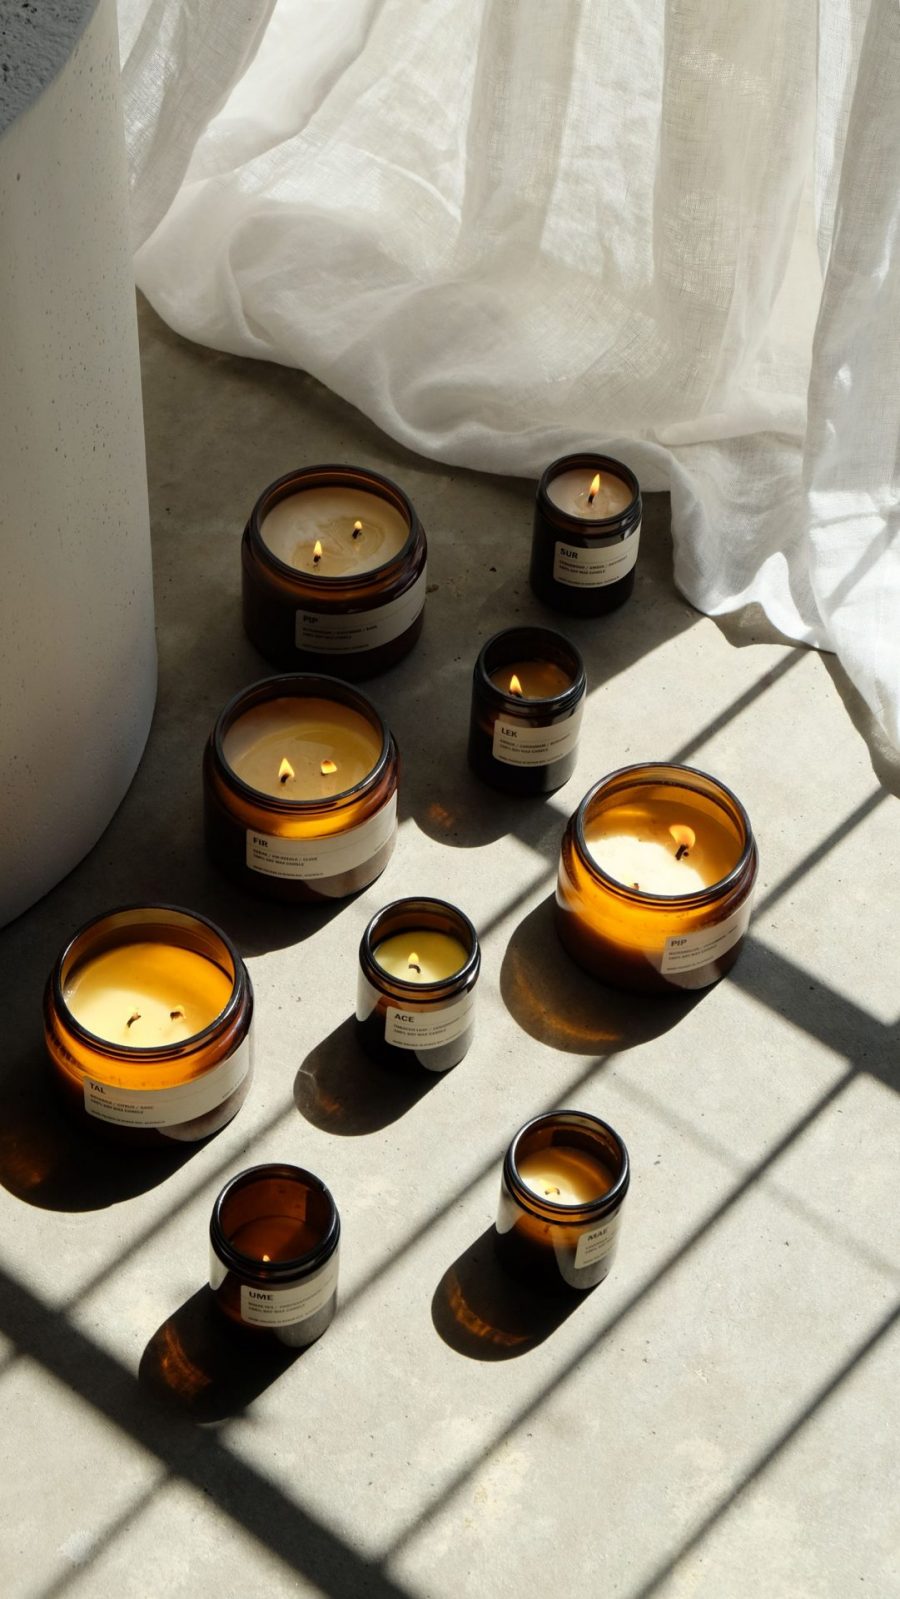 Posie amber candleS